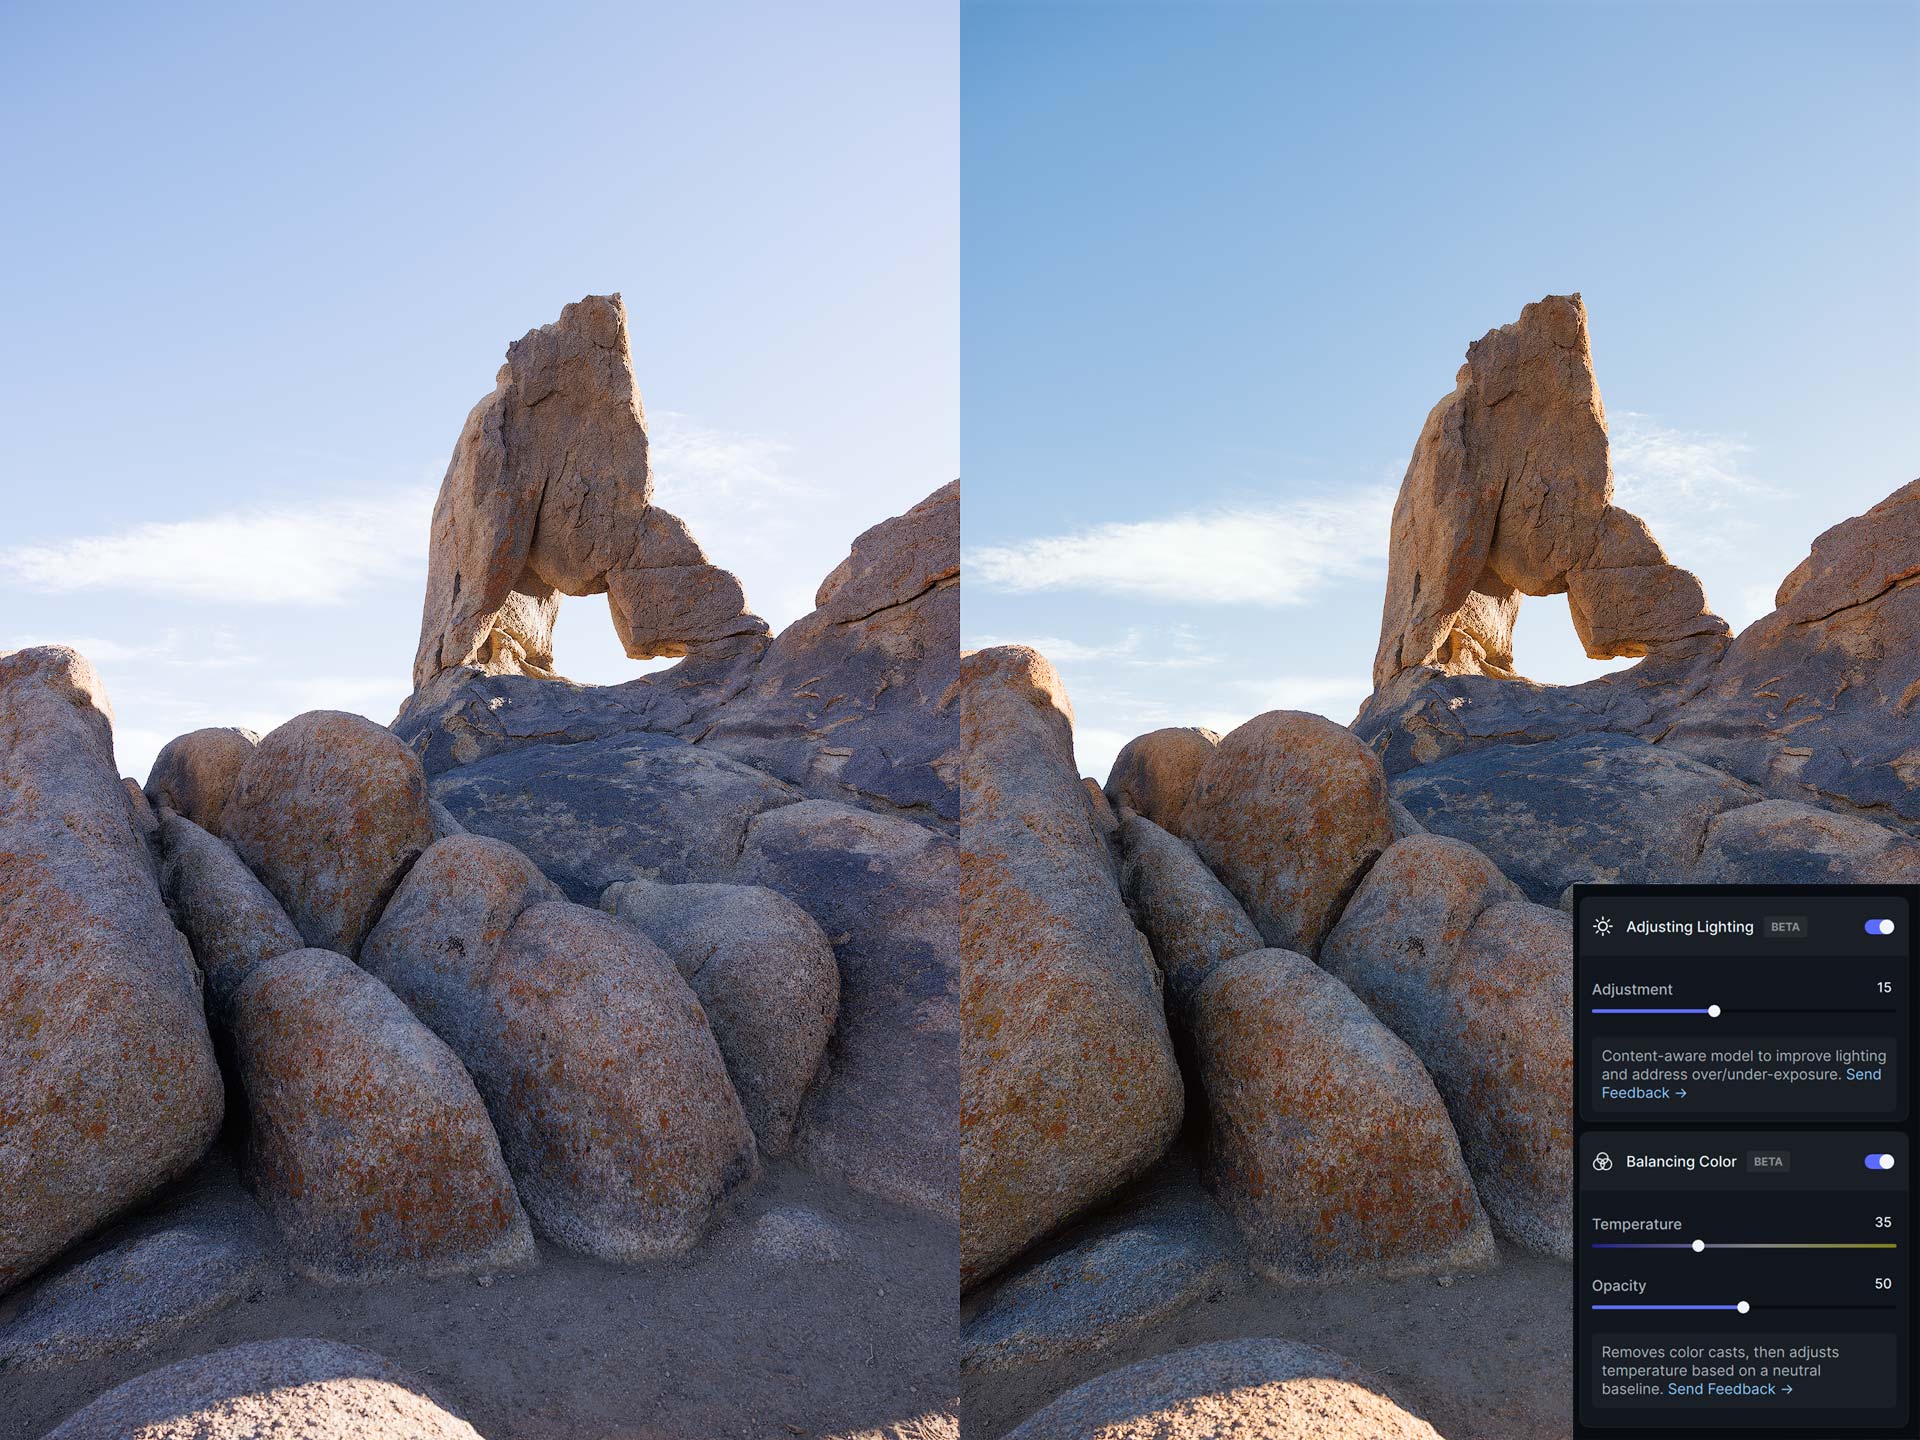 Before and after Adjust Lighting and Balance Color with custom adjustments in Photo AI v2